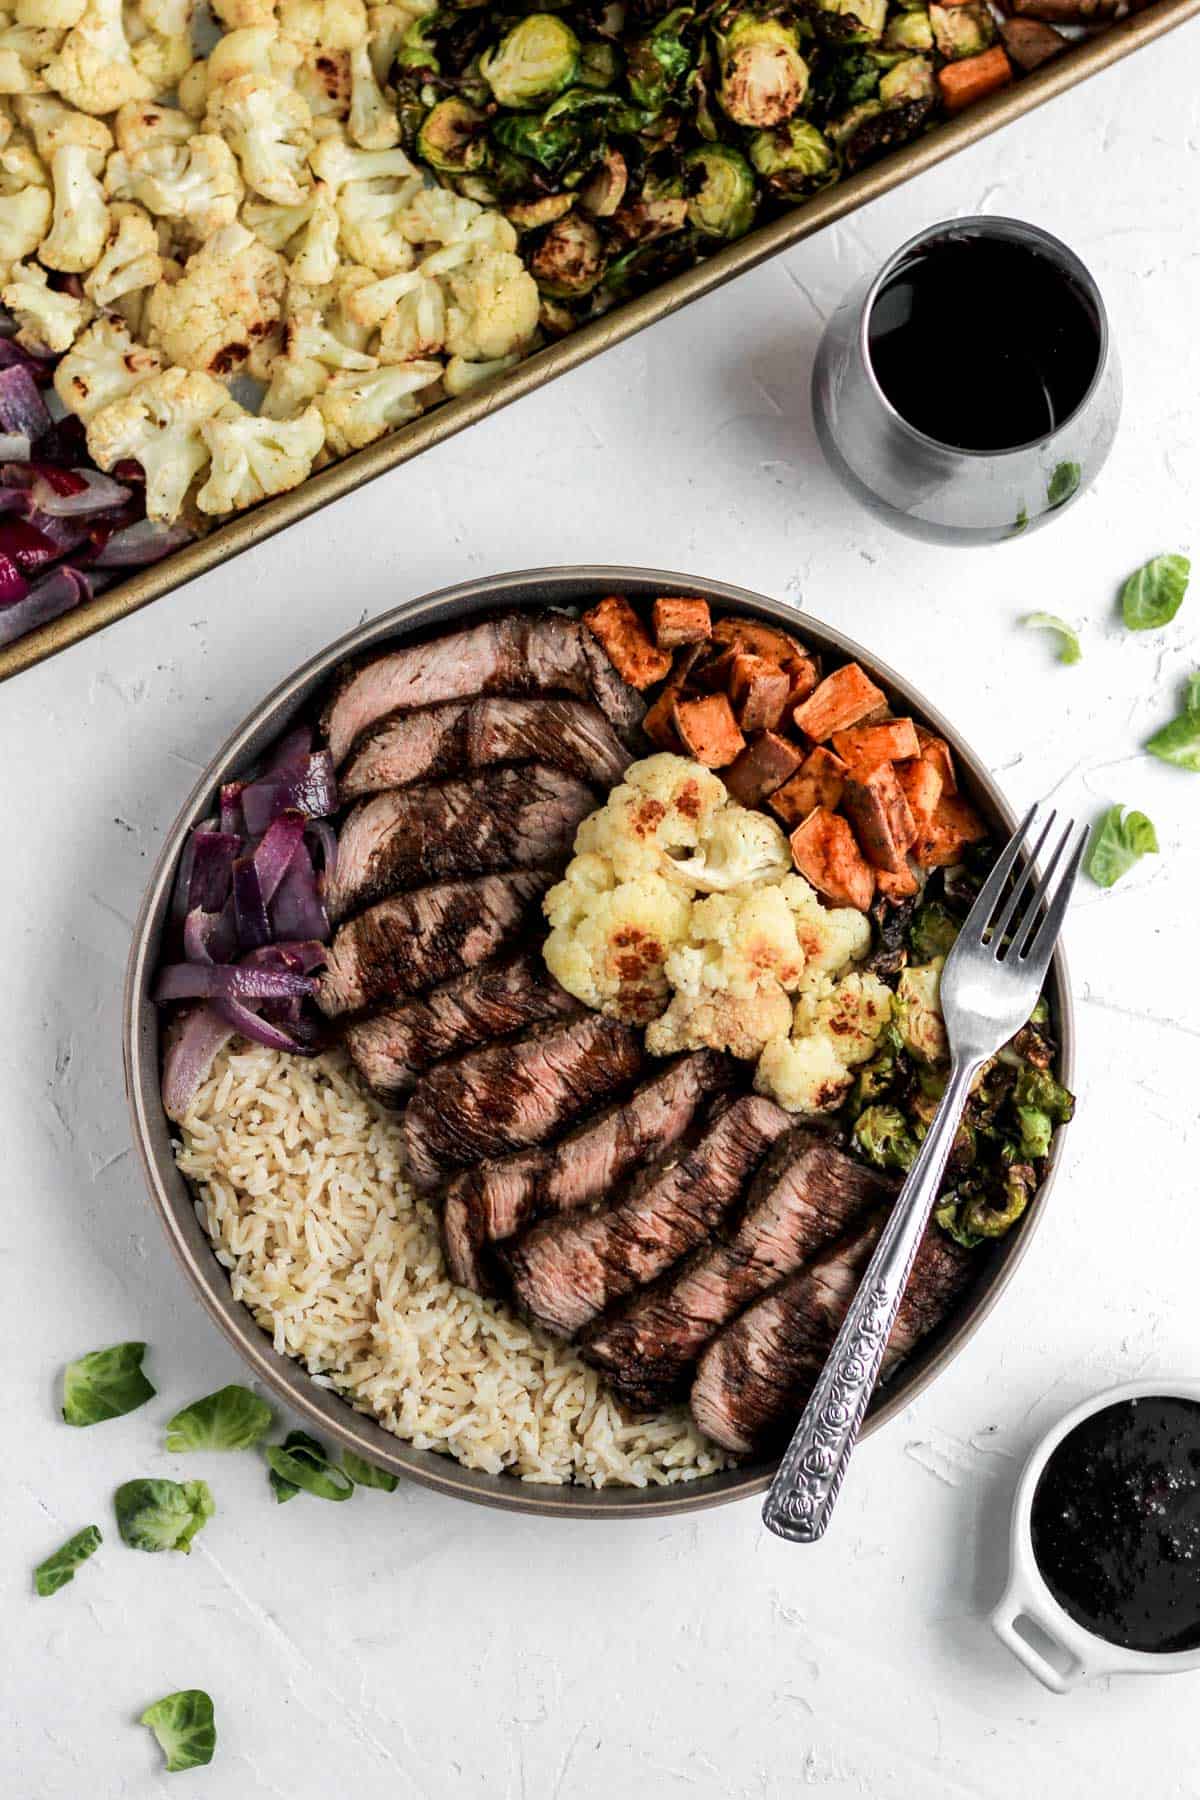 Glazed balsamic steak and veggie bowls with red wine and balsamic glaze in a white dish.